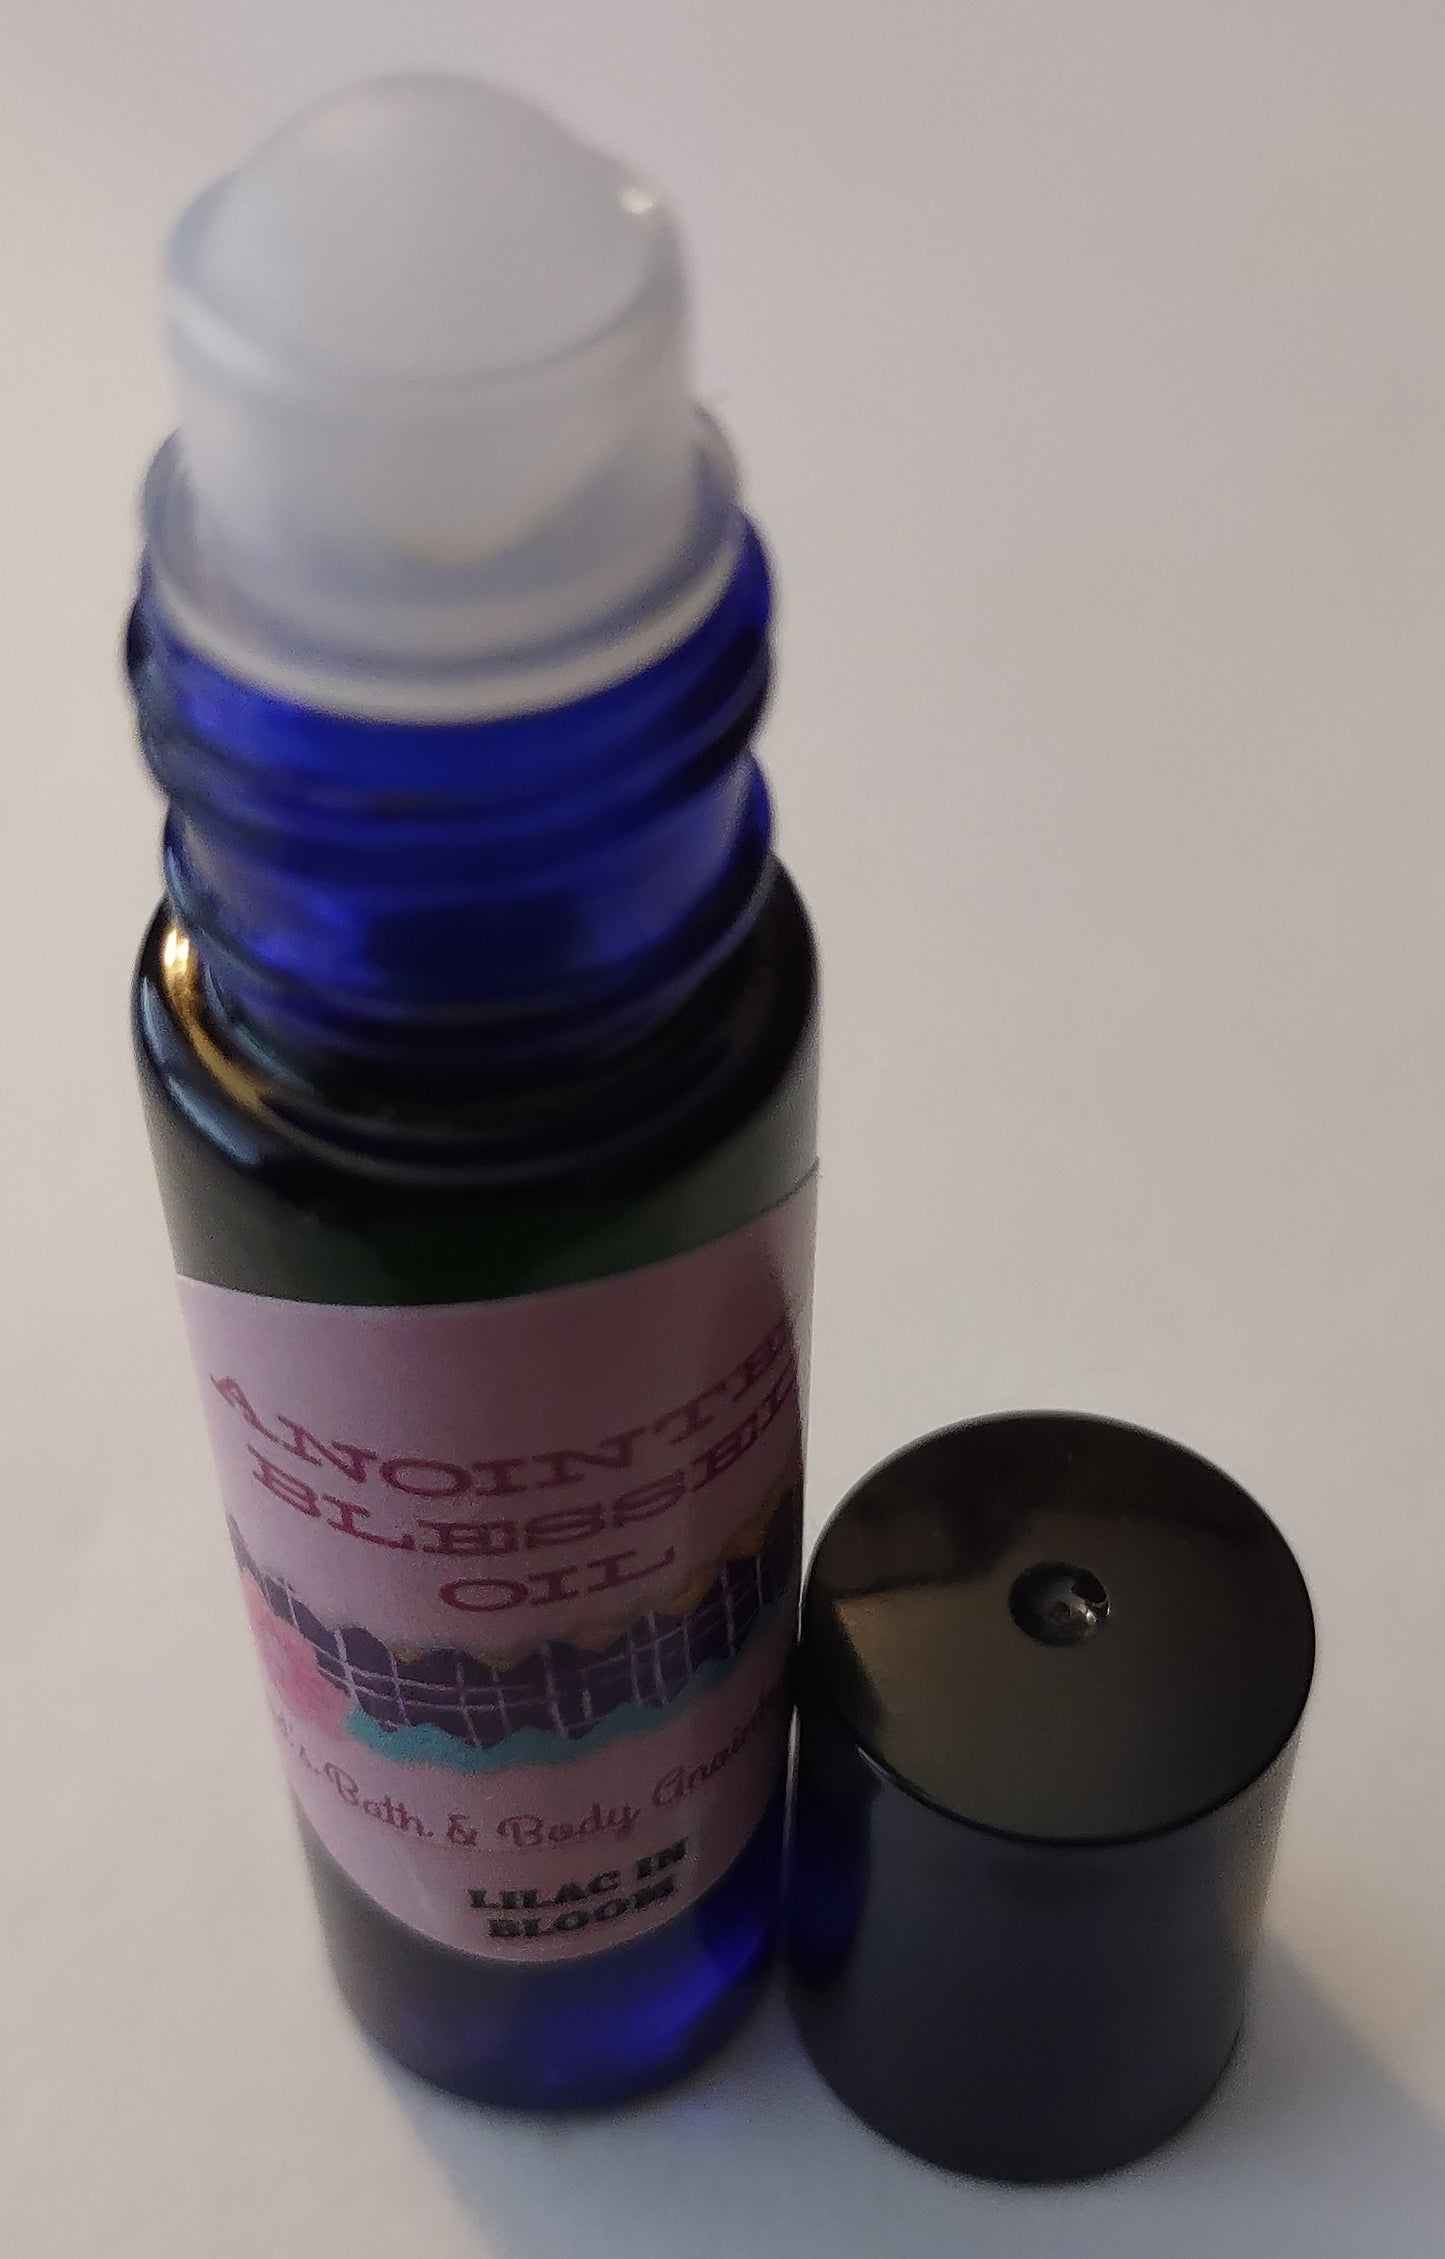 Lilac in Bloom anointed blessed oil - 1/3oz roll-on bottle